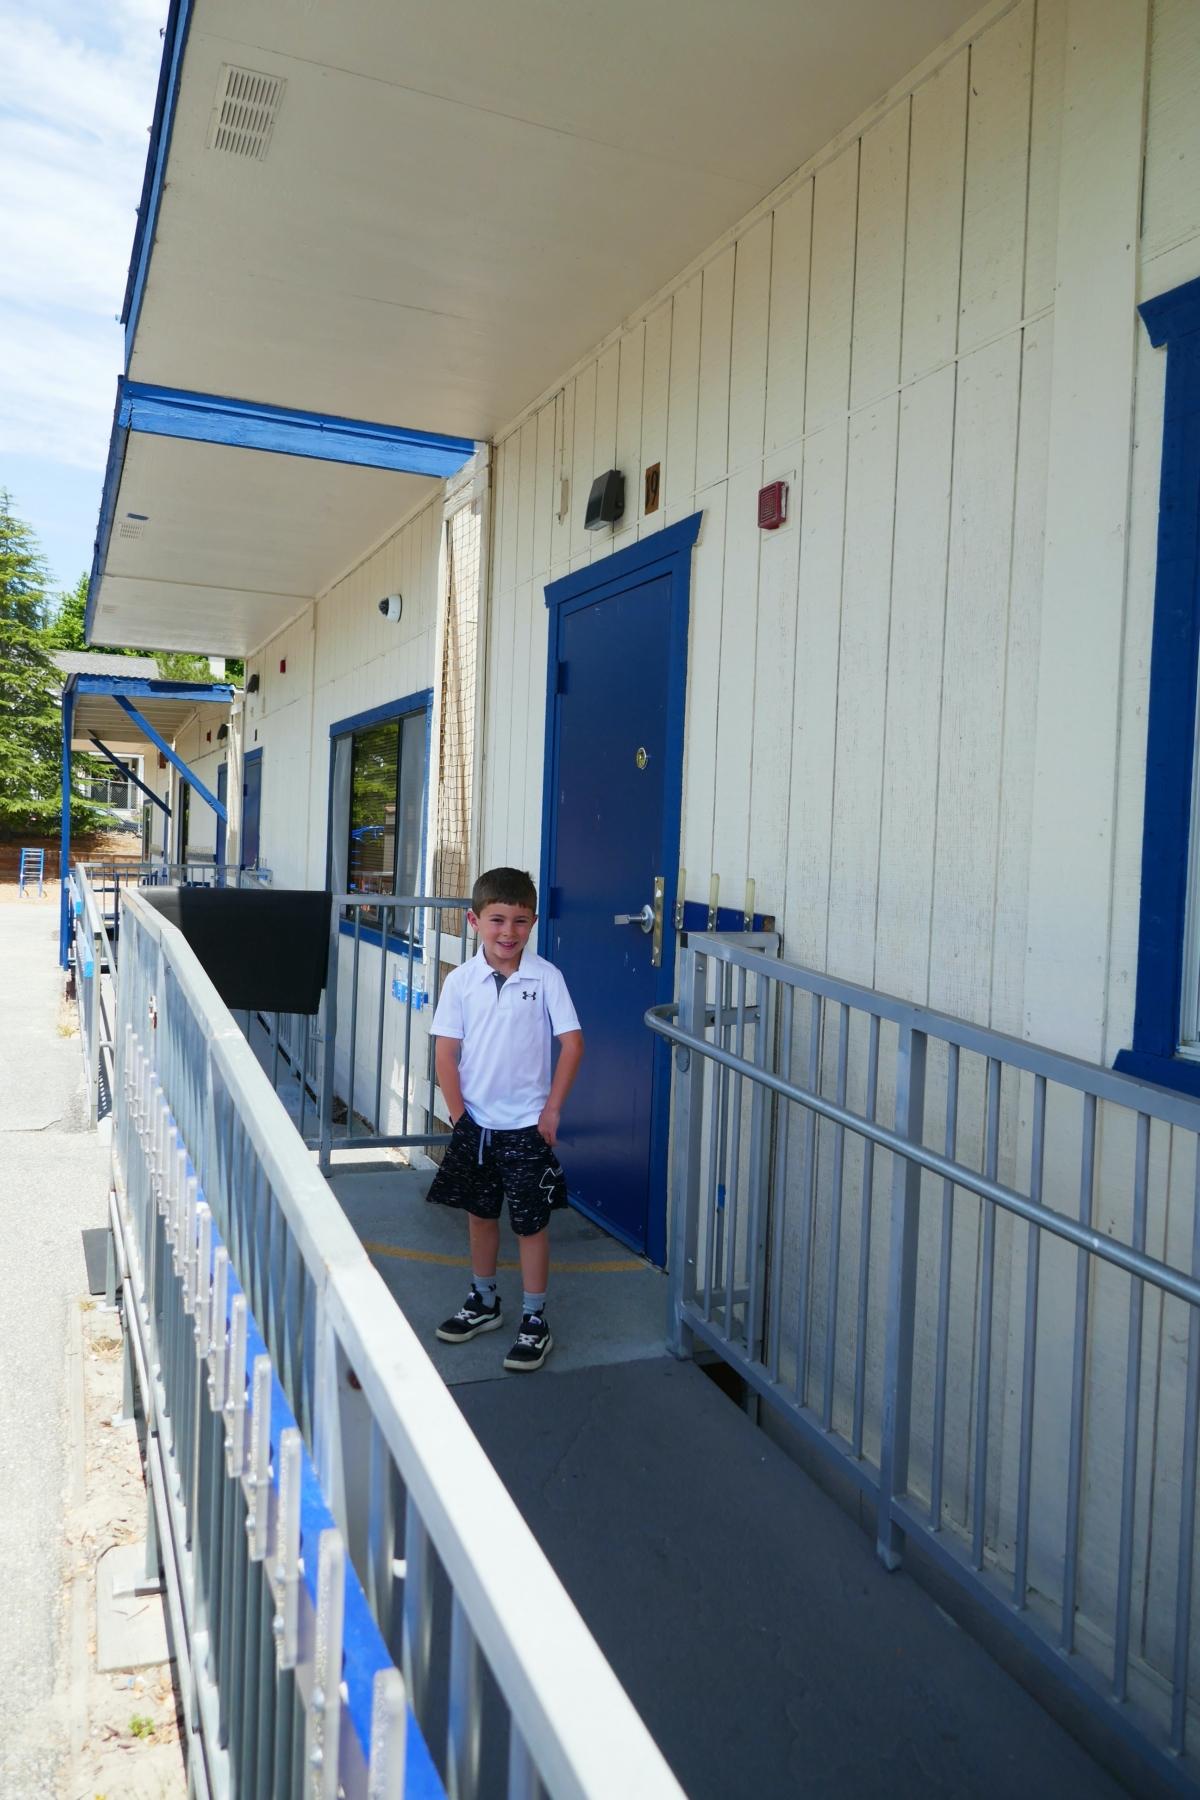  H.N. in front of his first-grade classroom at Brook Knoll Elementary School in Scotts Valley, Calif., on July 16, 2023. (Steve Ispas/The Epoch Times)